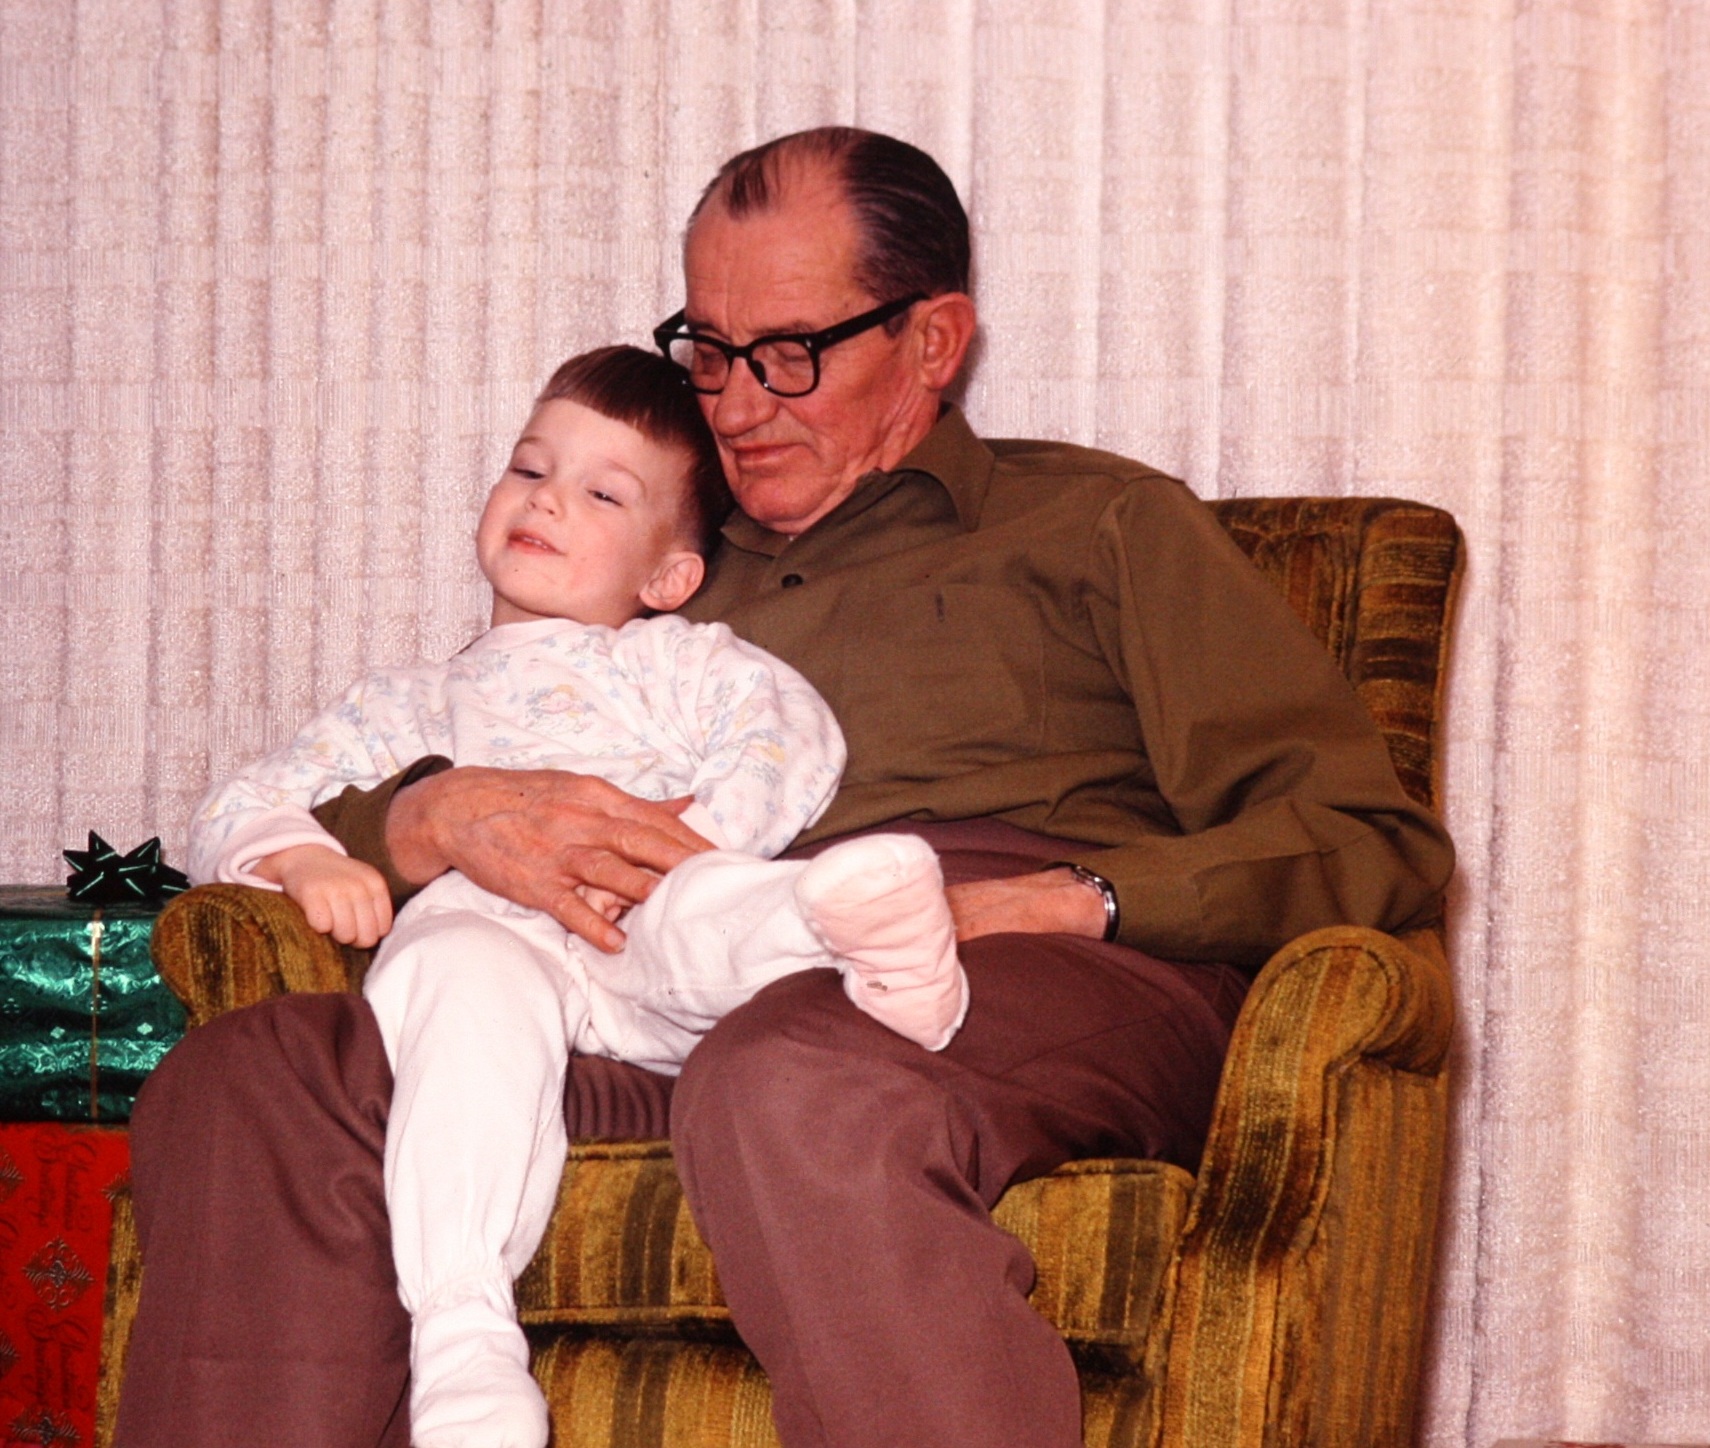 My paternal grandfather and my brother -- note the footie pajamas (though these are pink, so they may be hand-me-downs from my sister)